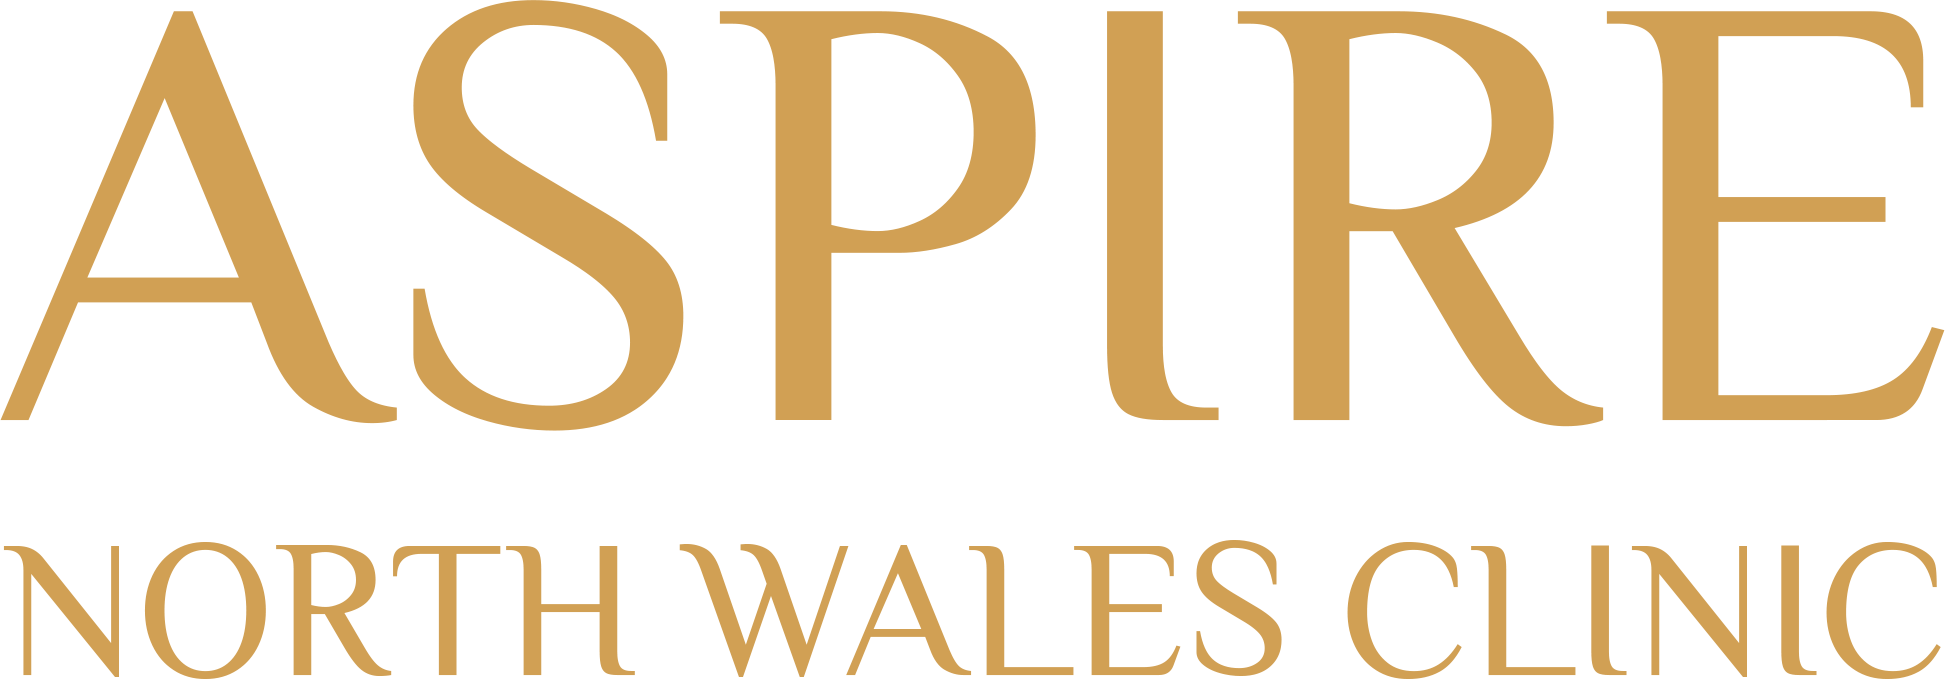 Aspire North Wales Clinic